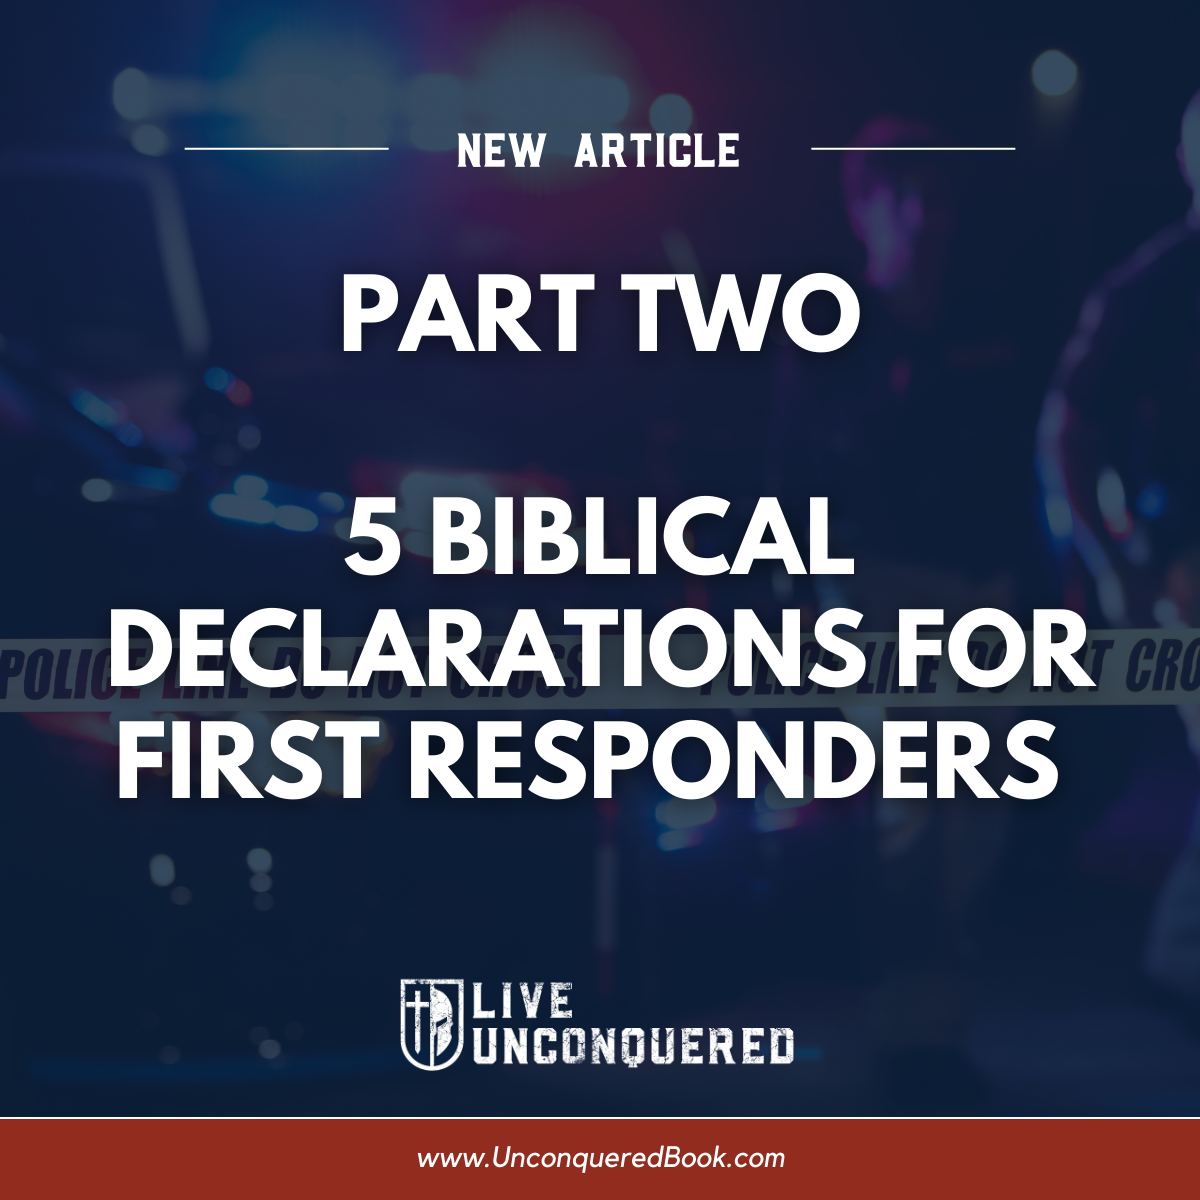 5 Biblical Declarations for First Responders  – Part 2